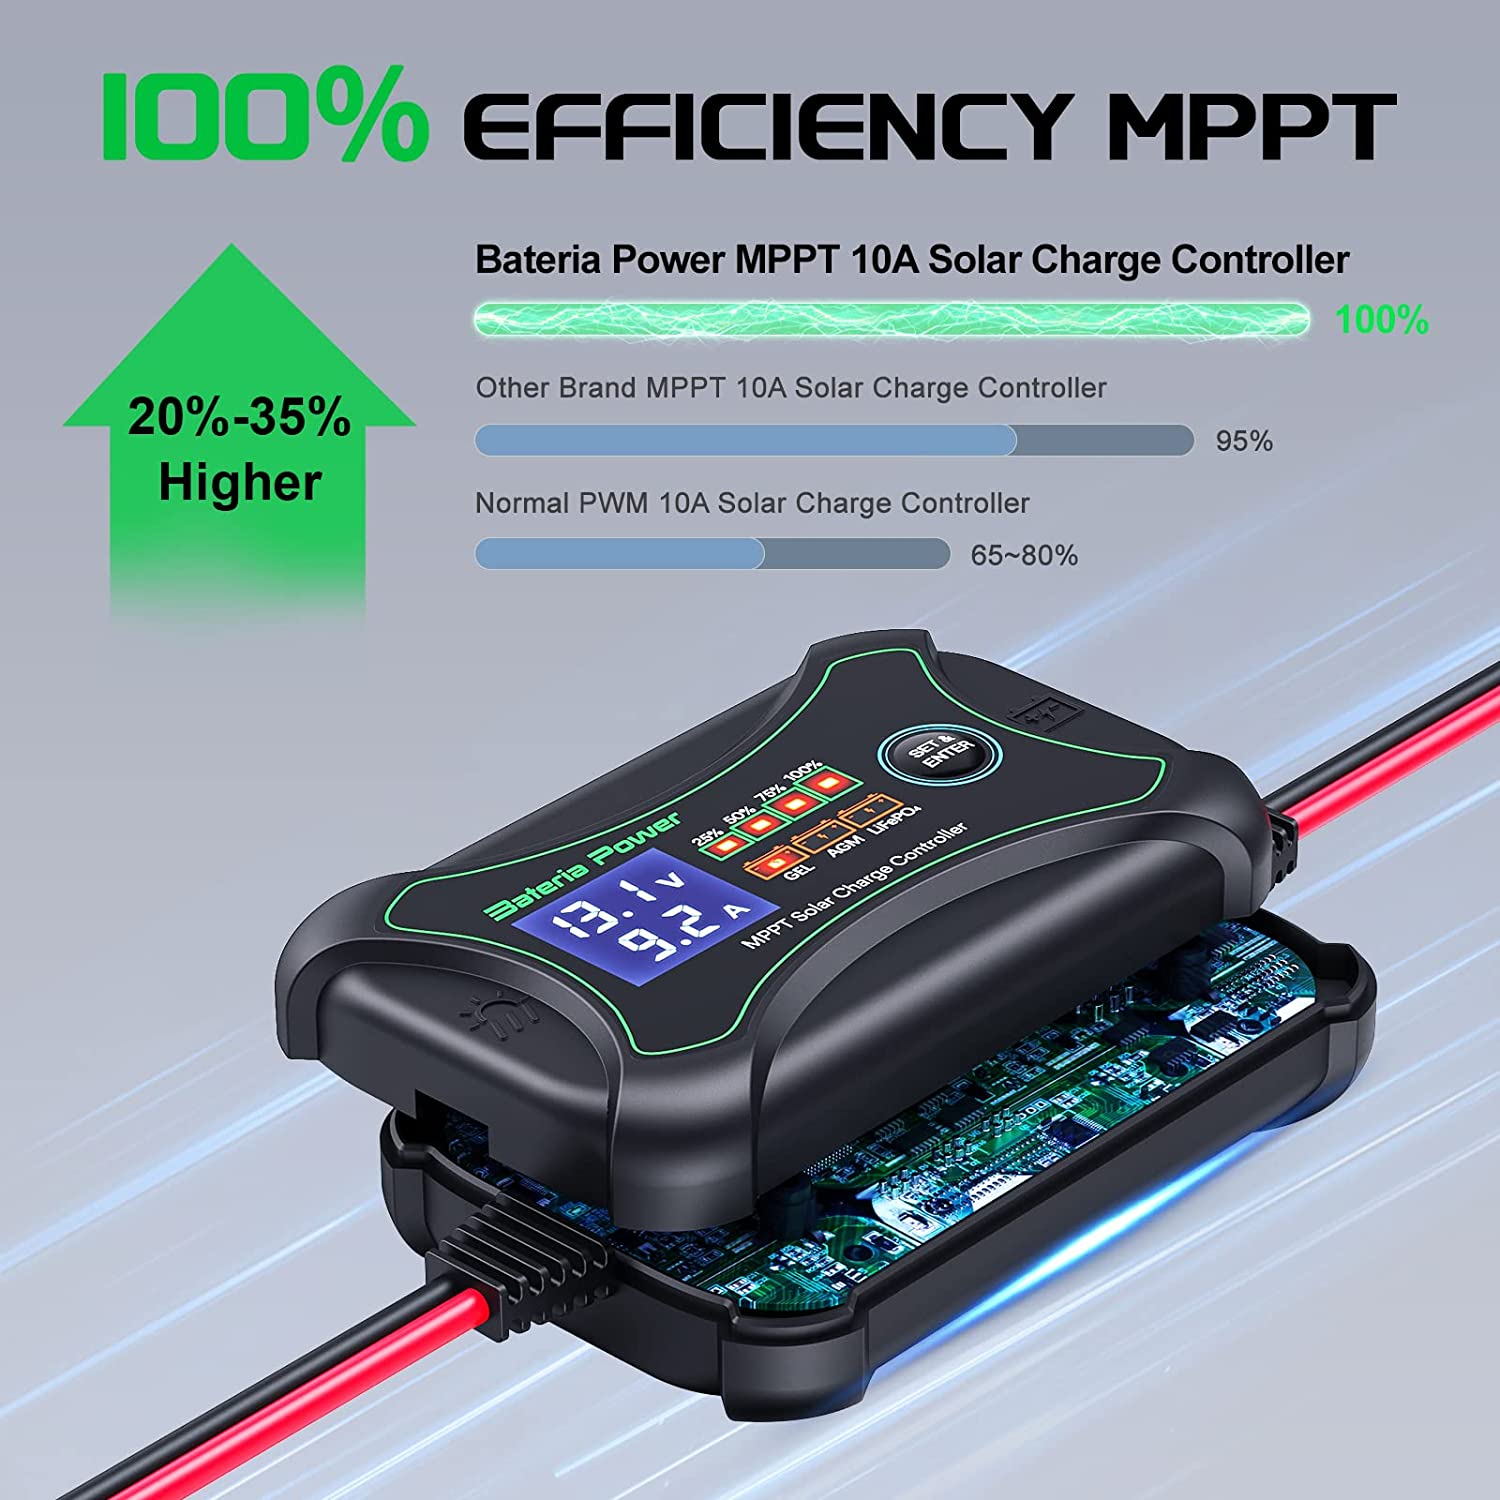 10a mppt solar charge controller for lifepo4 batteries